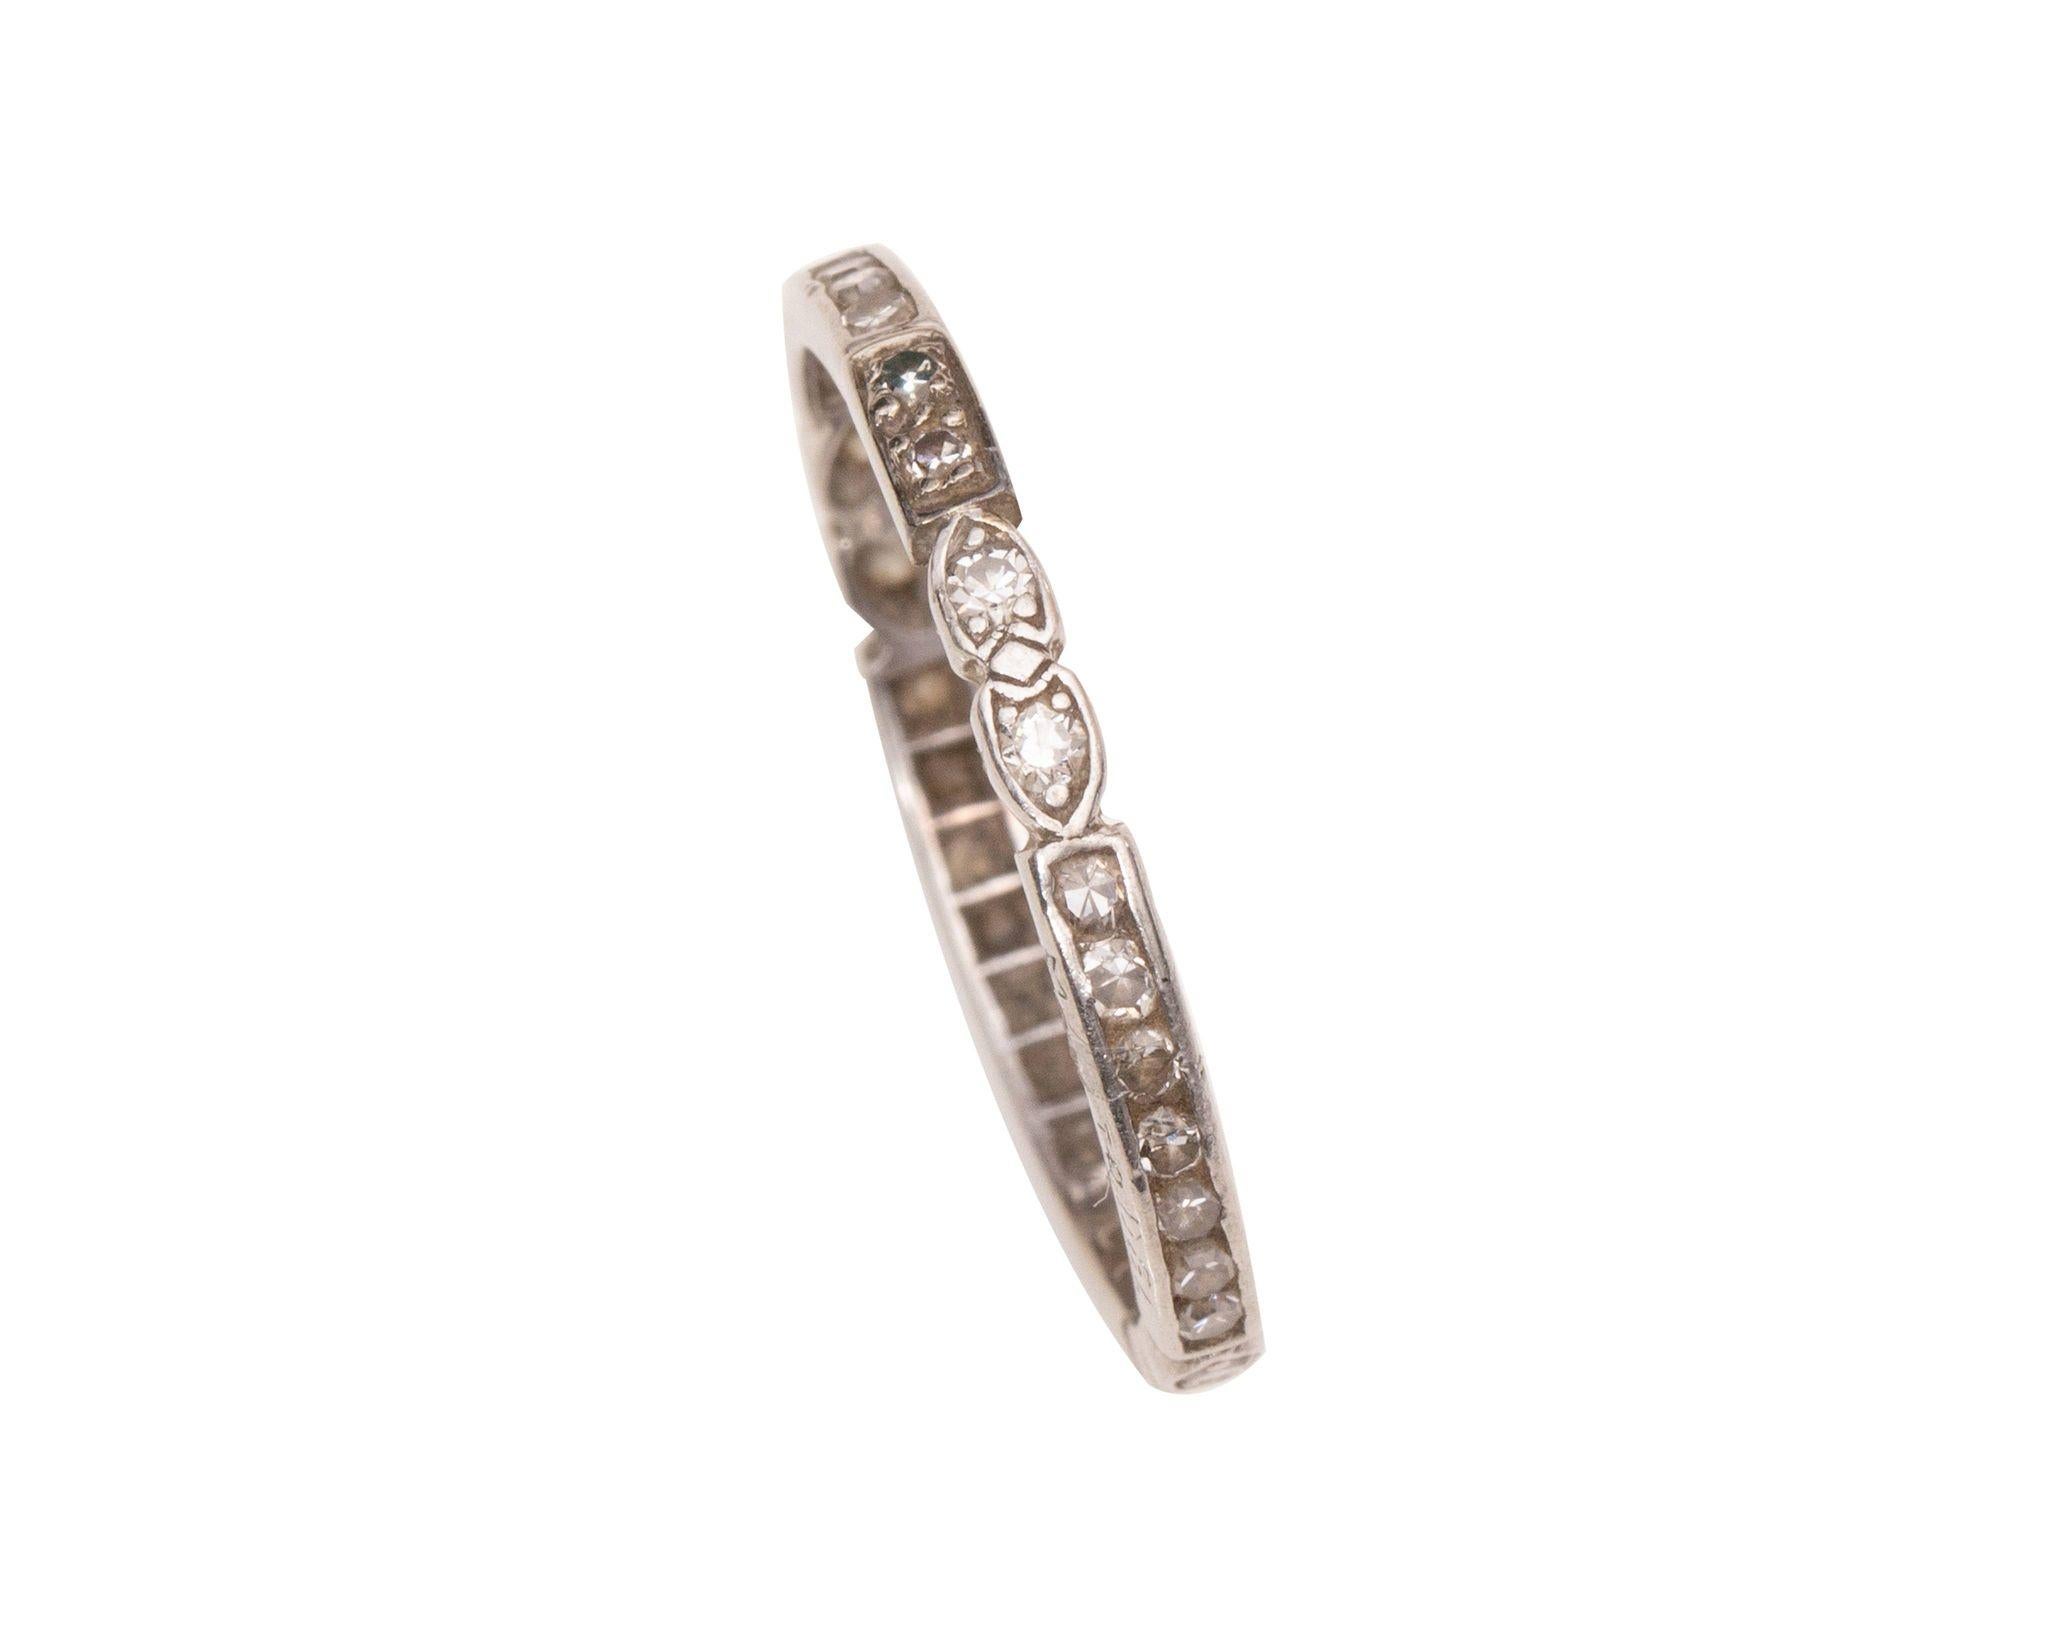 Here we have a lovely example of a vintage 1930's era platinum and diamond wedding band! The shimmering diamonds are .37 carats of classic beauty. What a wonderful band to pair with your vintage engagement ring! It will add more dazzle and sparkle